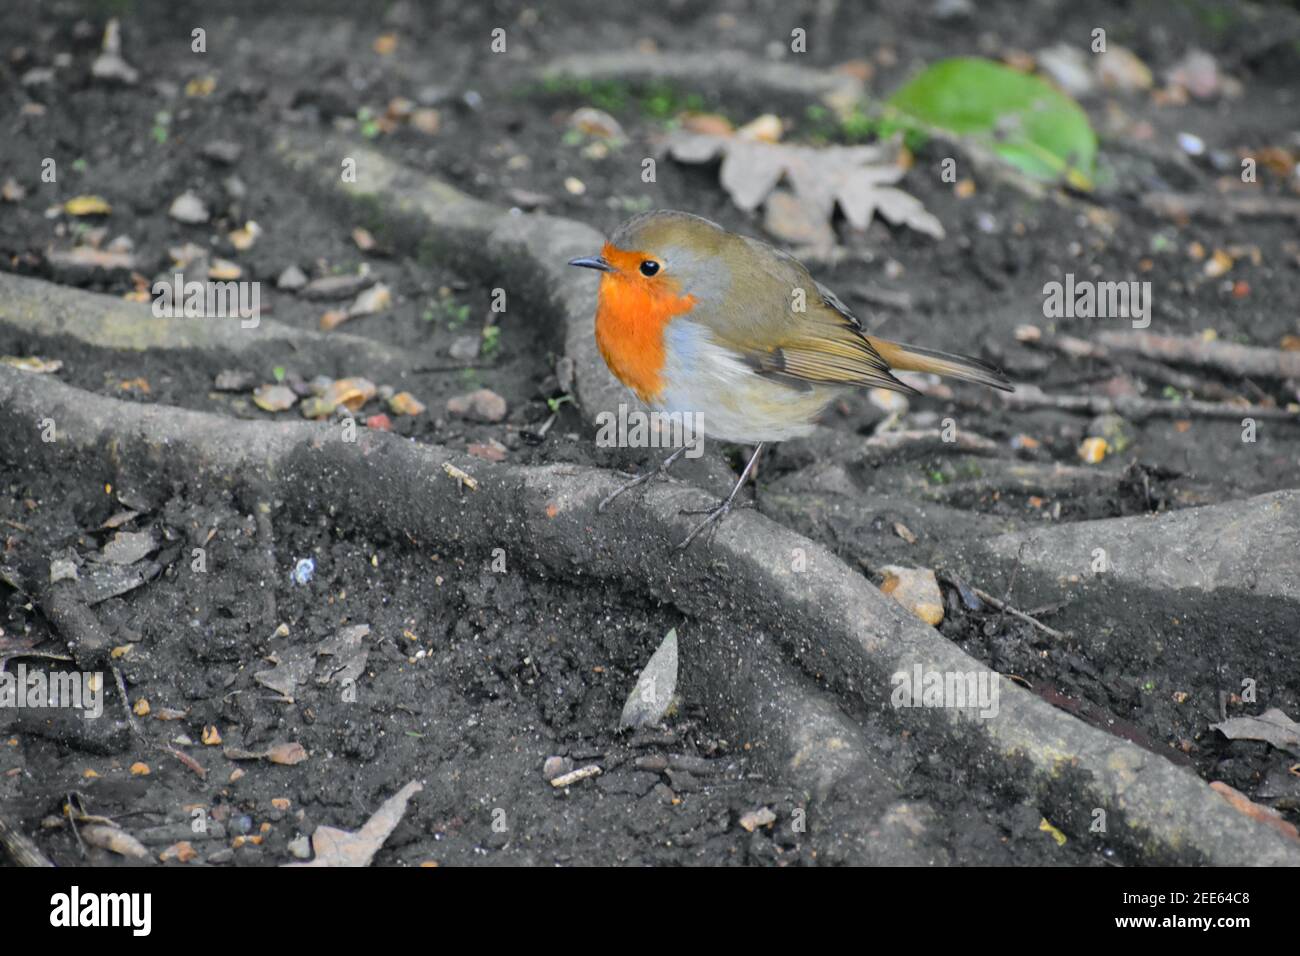 European robin actively hunts insects on moonlit nights or near artificial light at night. Garden bird with orange breast face olive-tinged upperparts Stock Photo